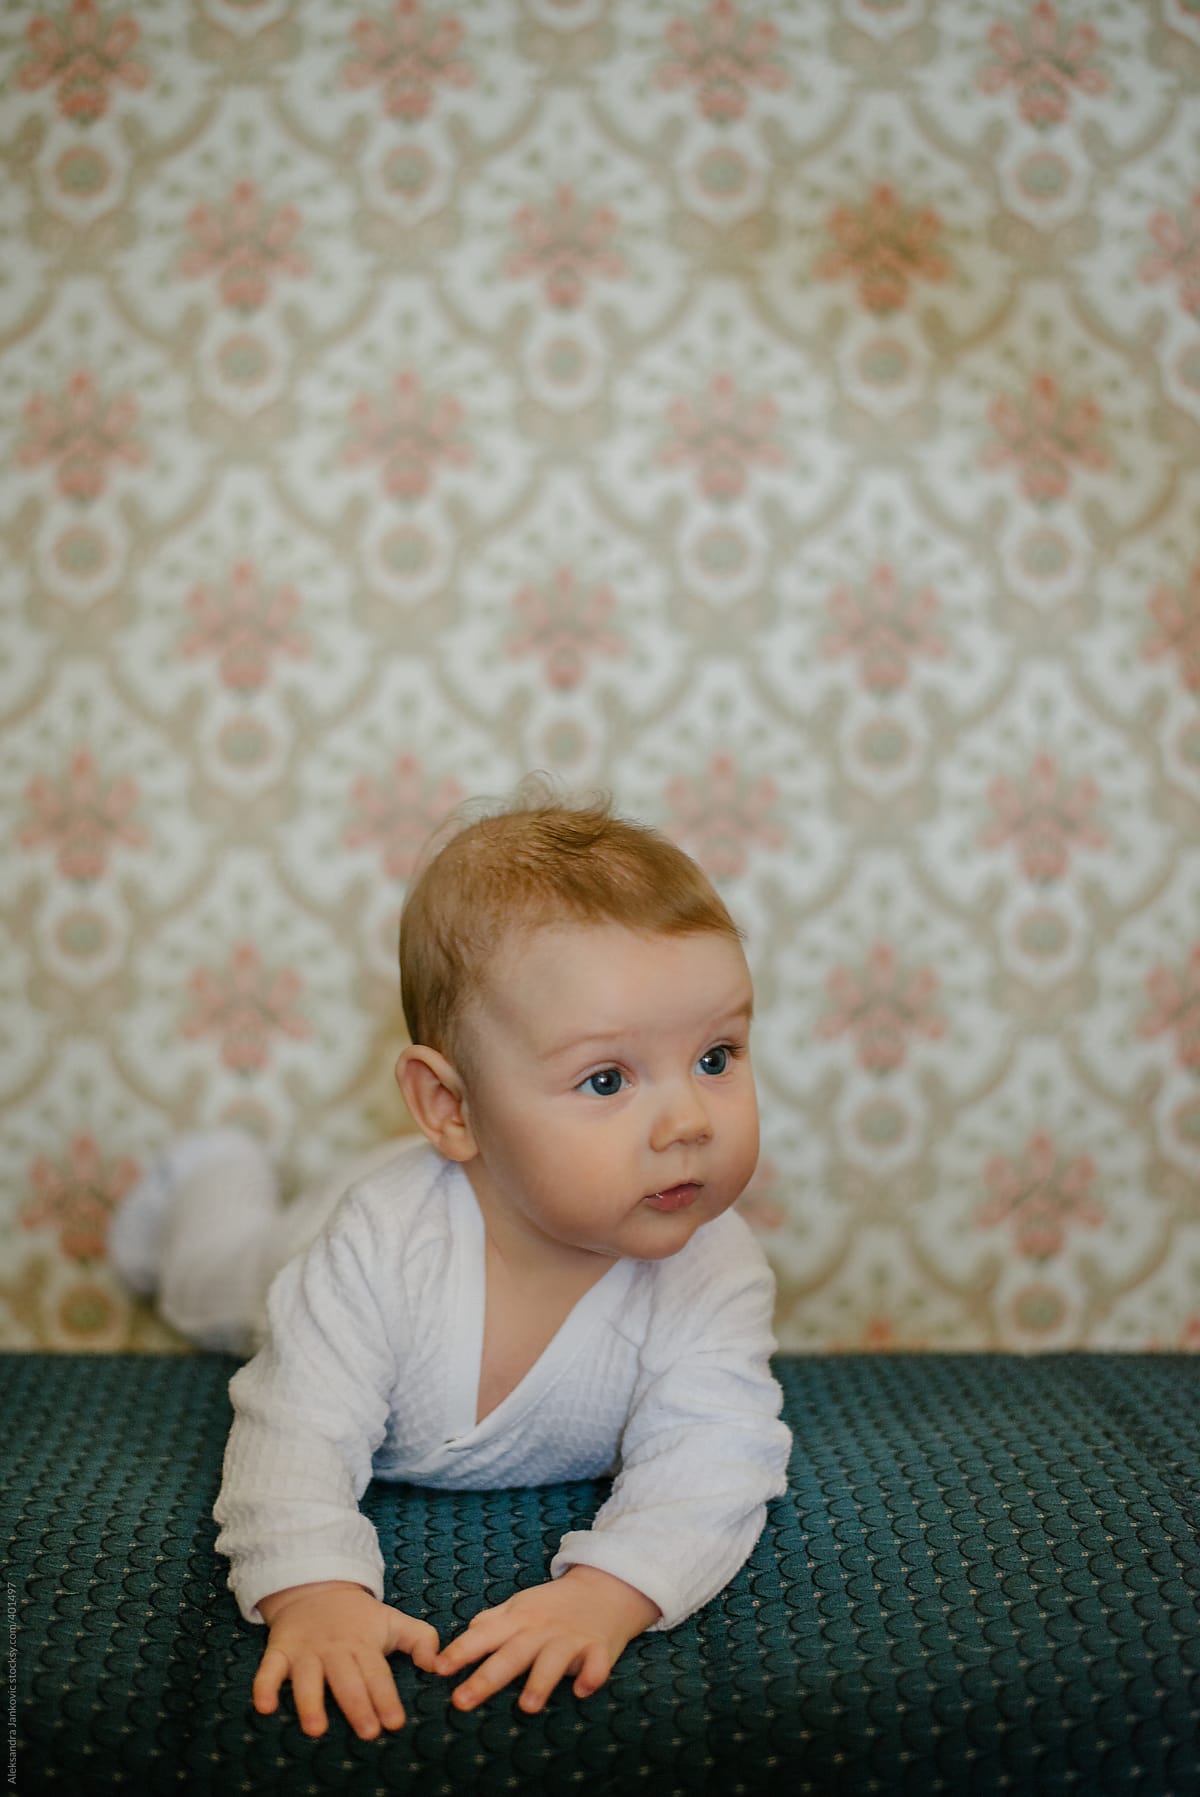 Cute Baby Girl Portrait In Front Of The Vintage Wallpaper